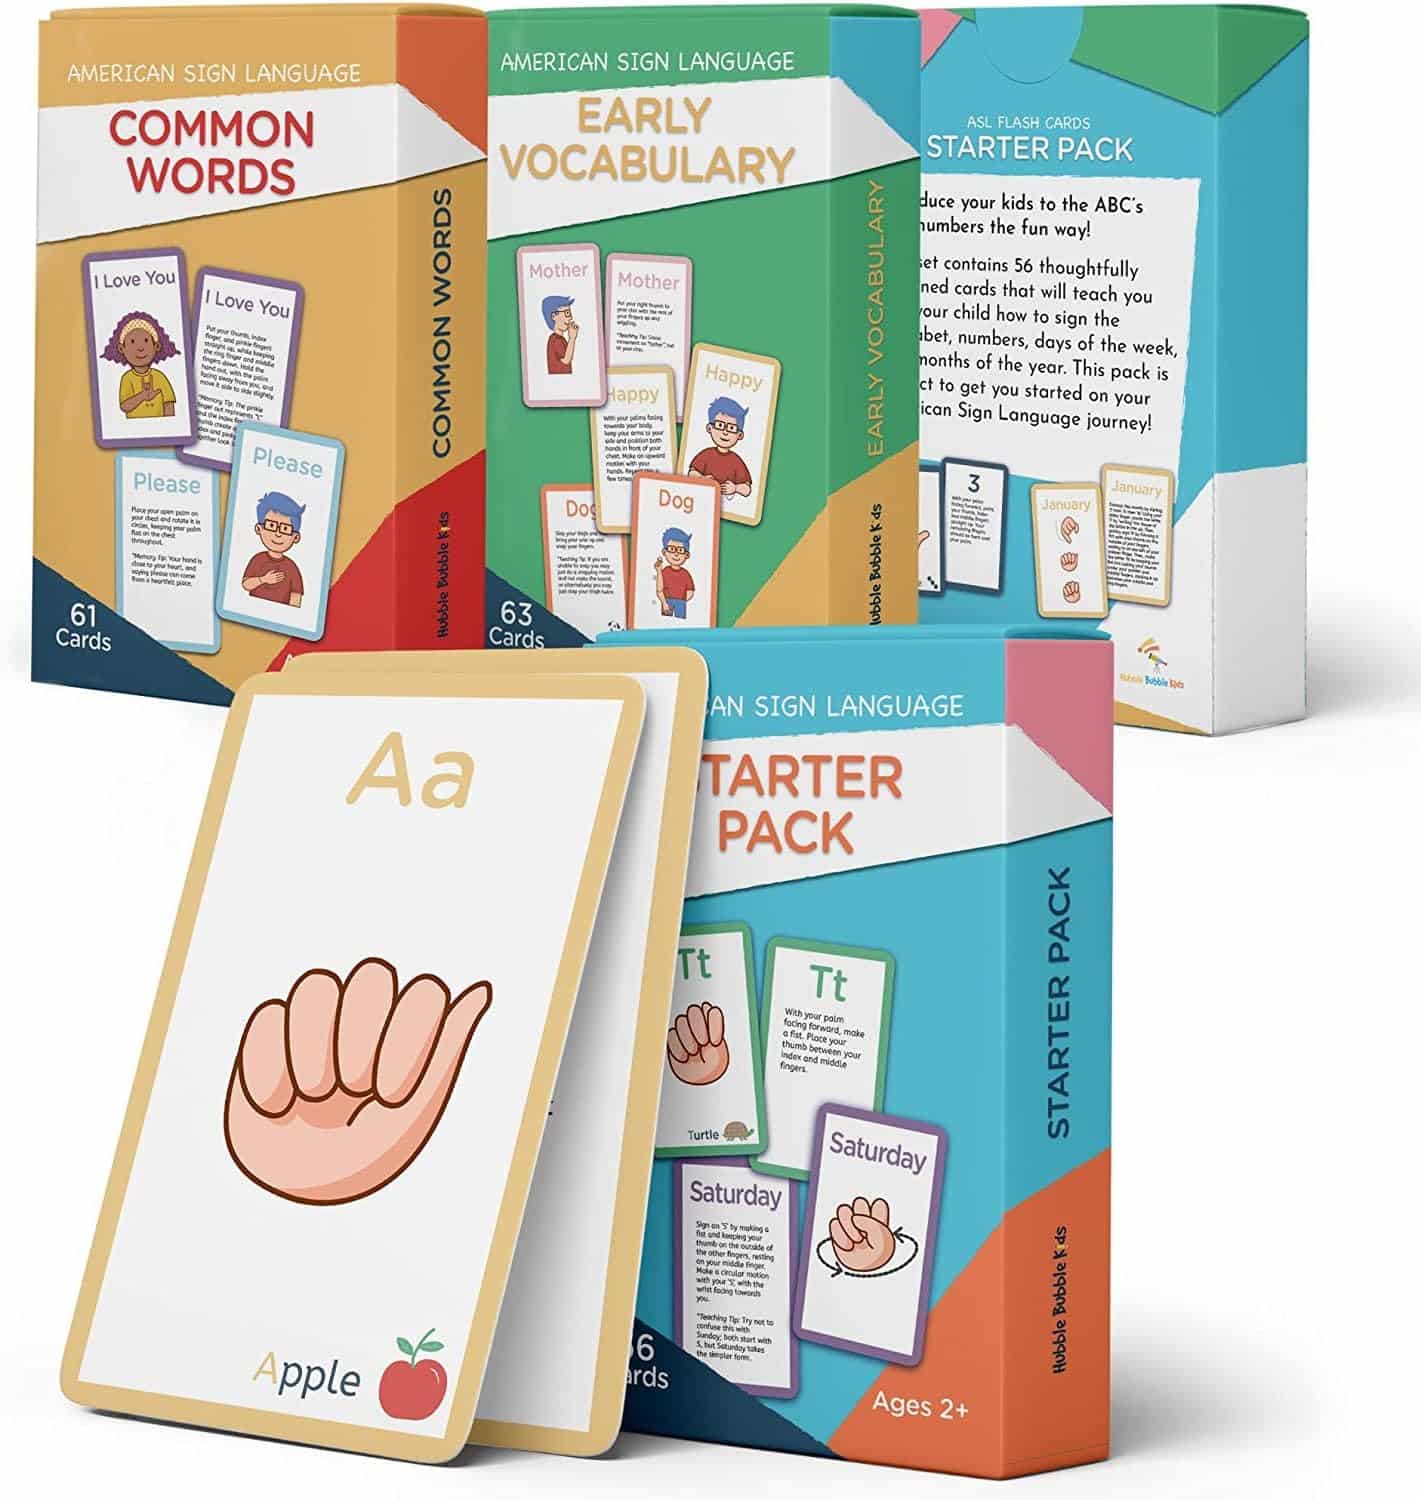 American Sign Language Cards for Toddlers and Beginners - 180 ASL Flash Cards for Babies, Toddlers, Kids. ASL ABC Cards Include Starter, Vocab and Common Sight Words Cards